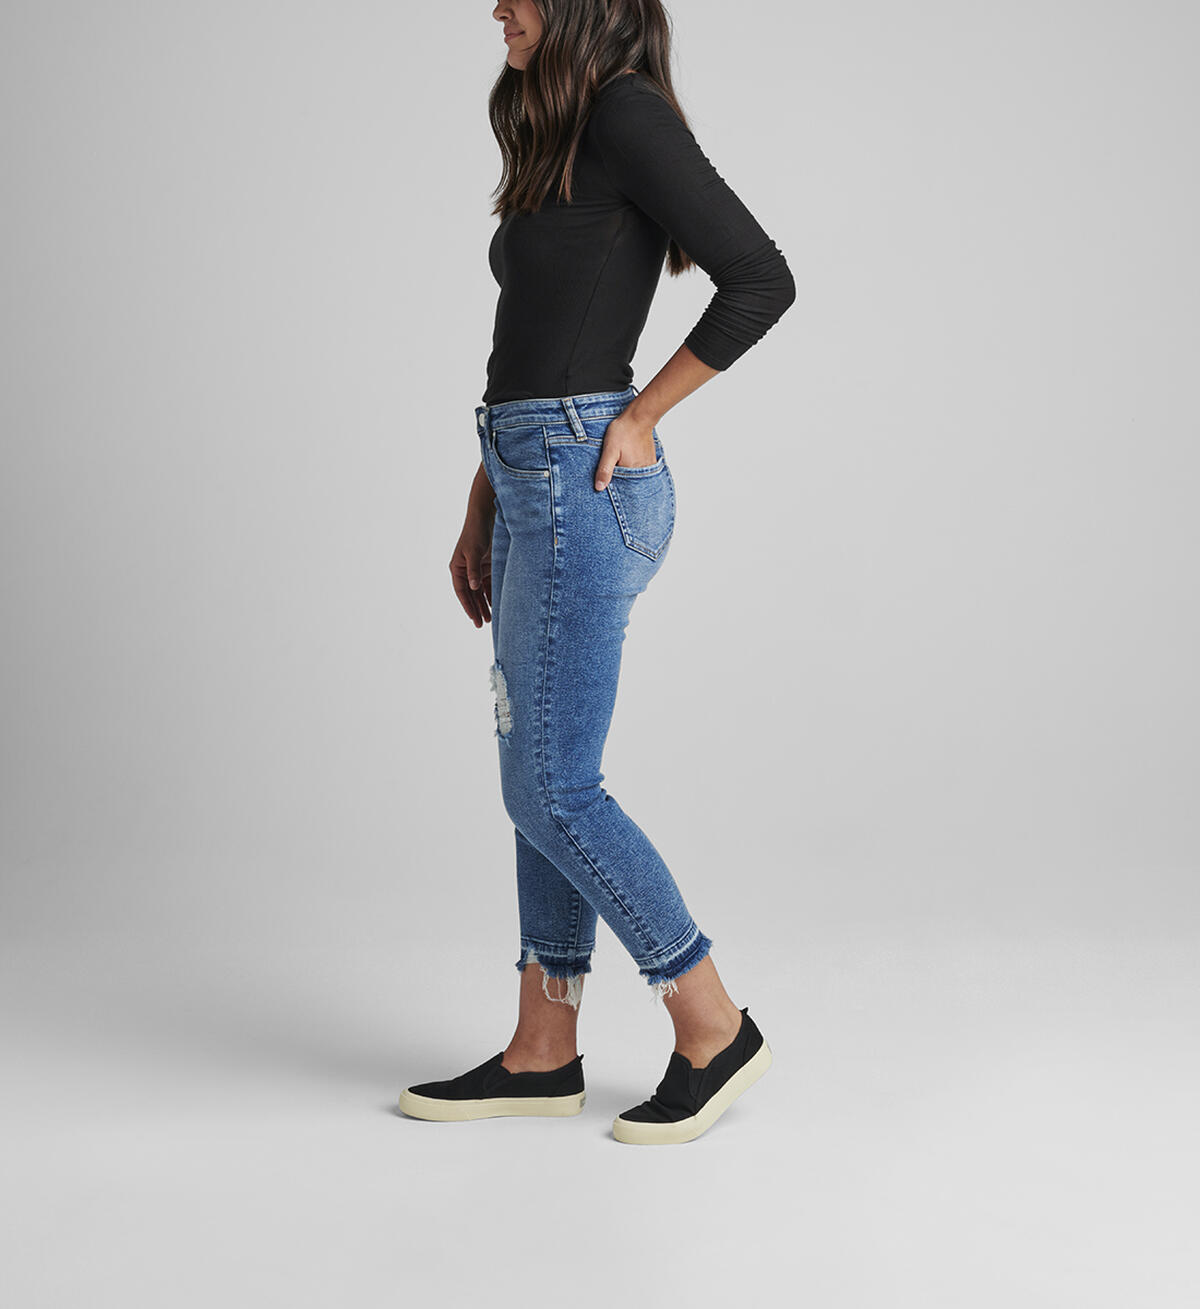 Carter Mid Rise Girlfriend Jeans, , hi-res image number 2